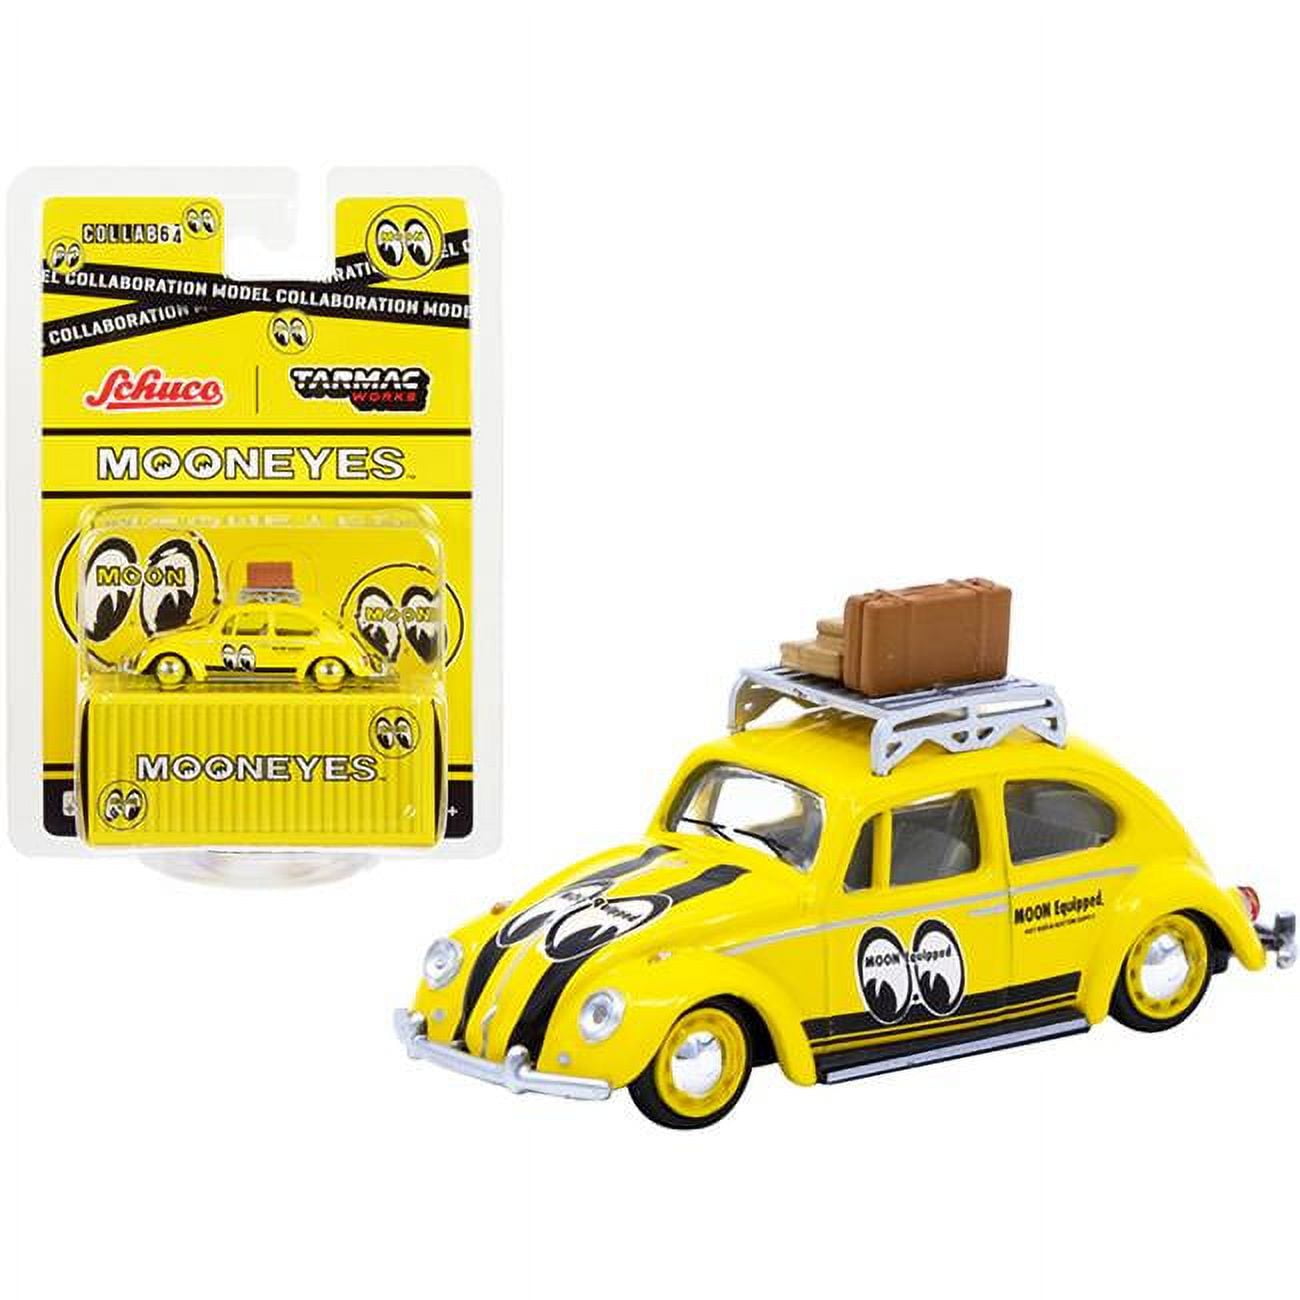 T64S-006-ME1 Volkswagen Beetle Low Ride Yellow with Roof Rack & Luggage Mooneyes Collaboration Model 1-64 Scale Diecast Model Car -  Schuco